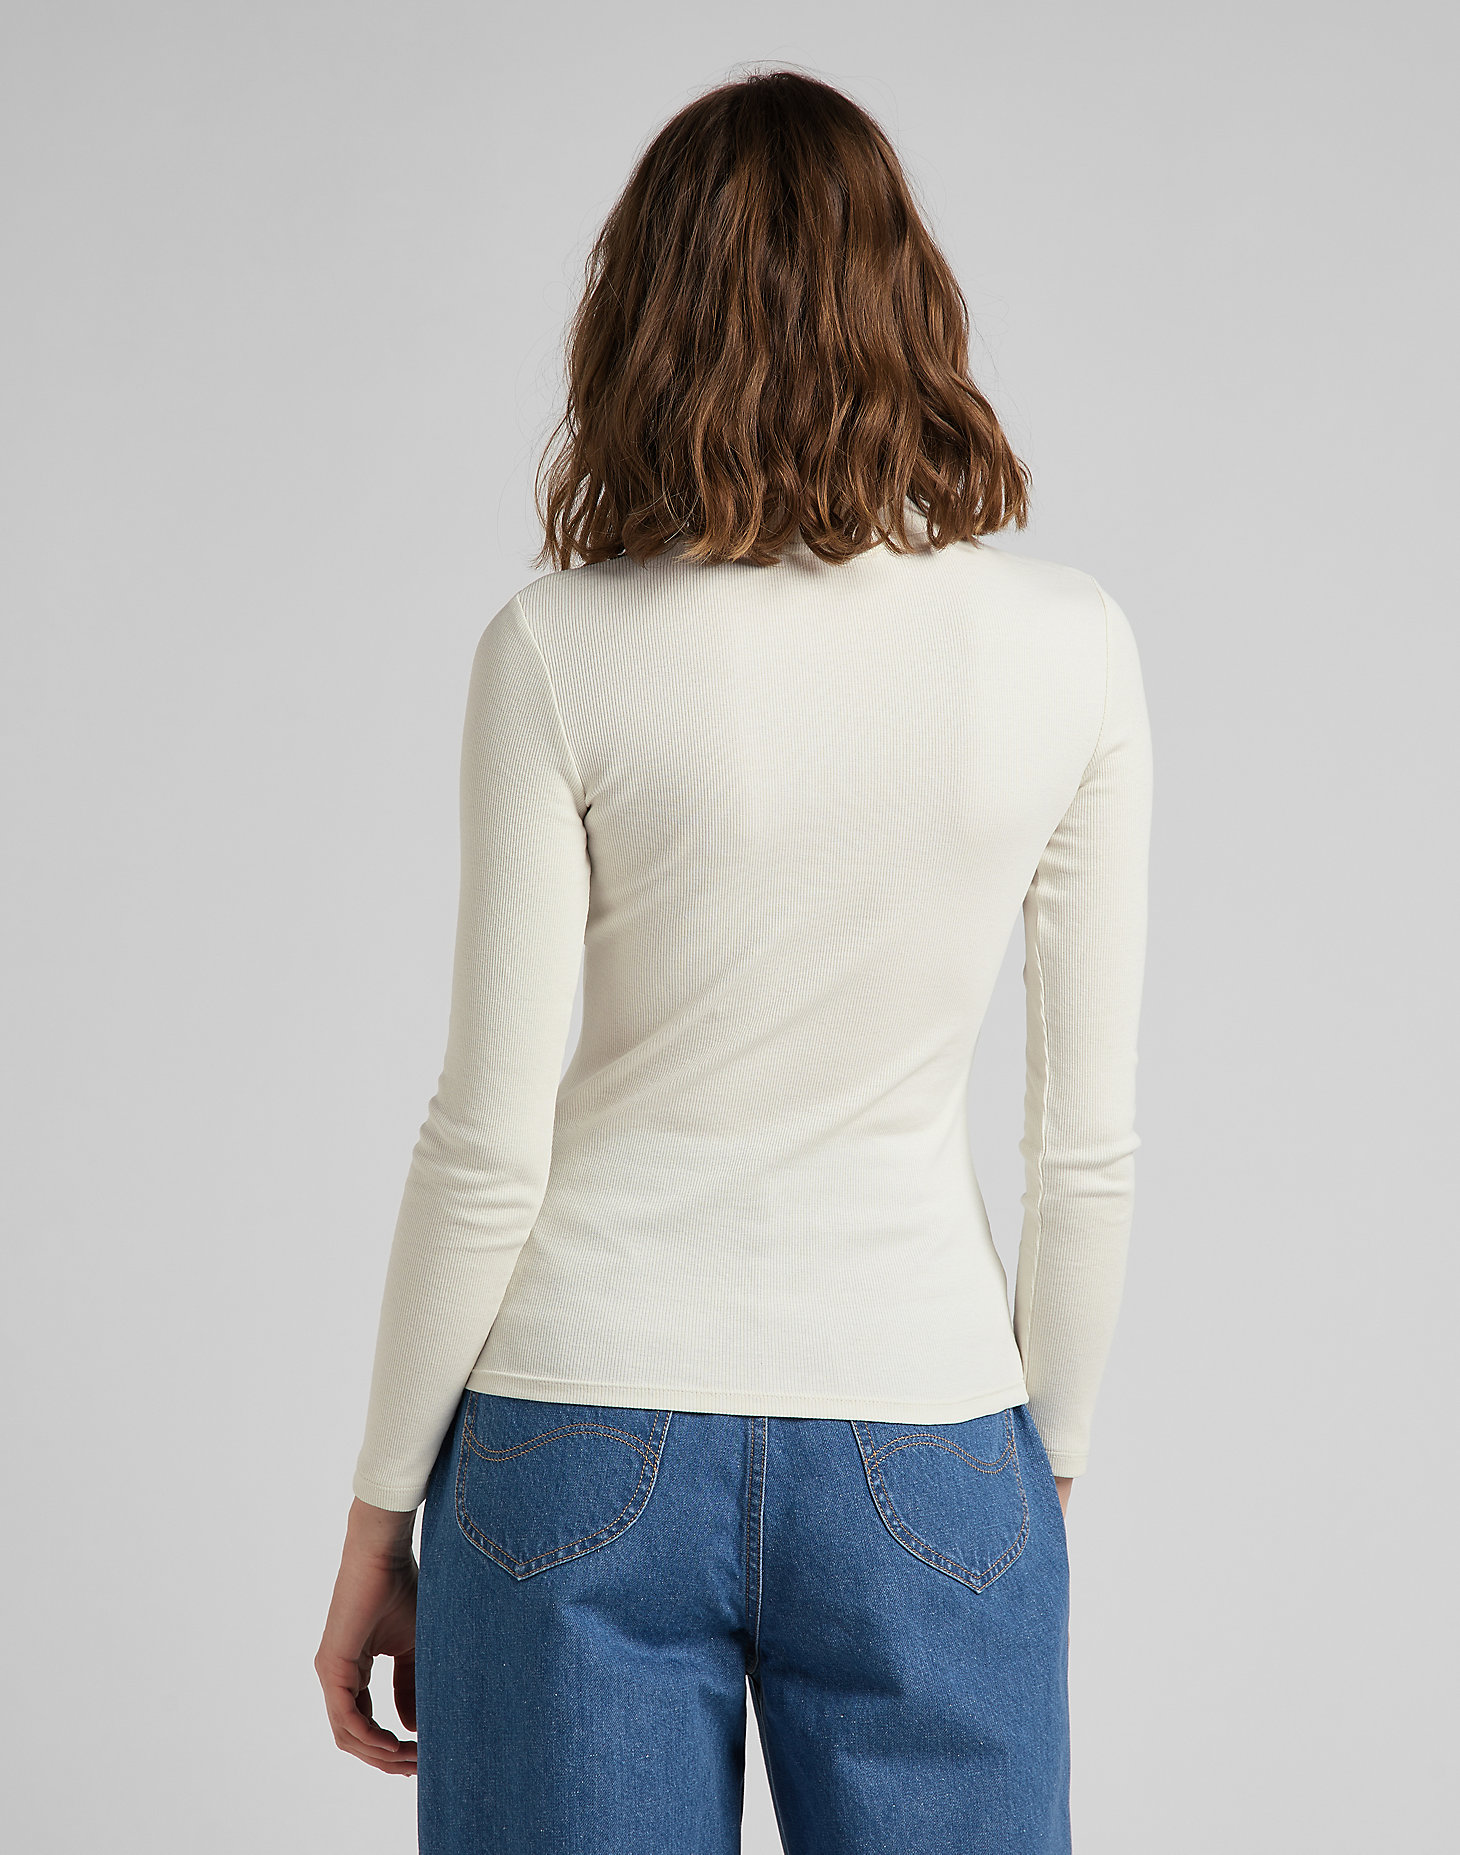 Ribbed Long Sleeve Tee in Workwear White alternative view 1